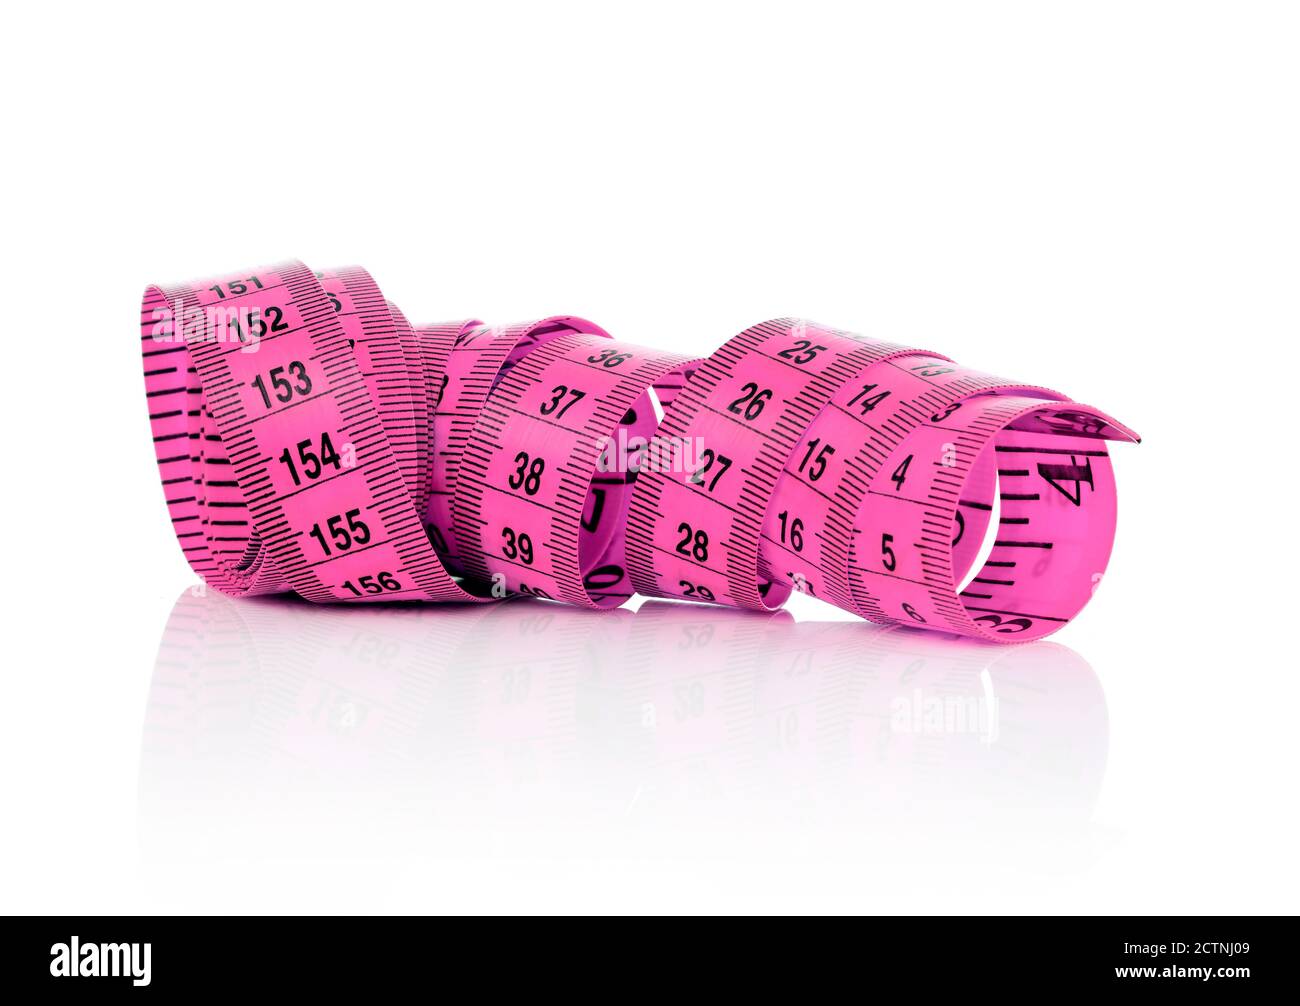 Pink Tape Measure Stock Photo, Picture and Royalty Free Image. Image  82862758.